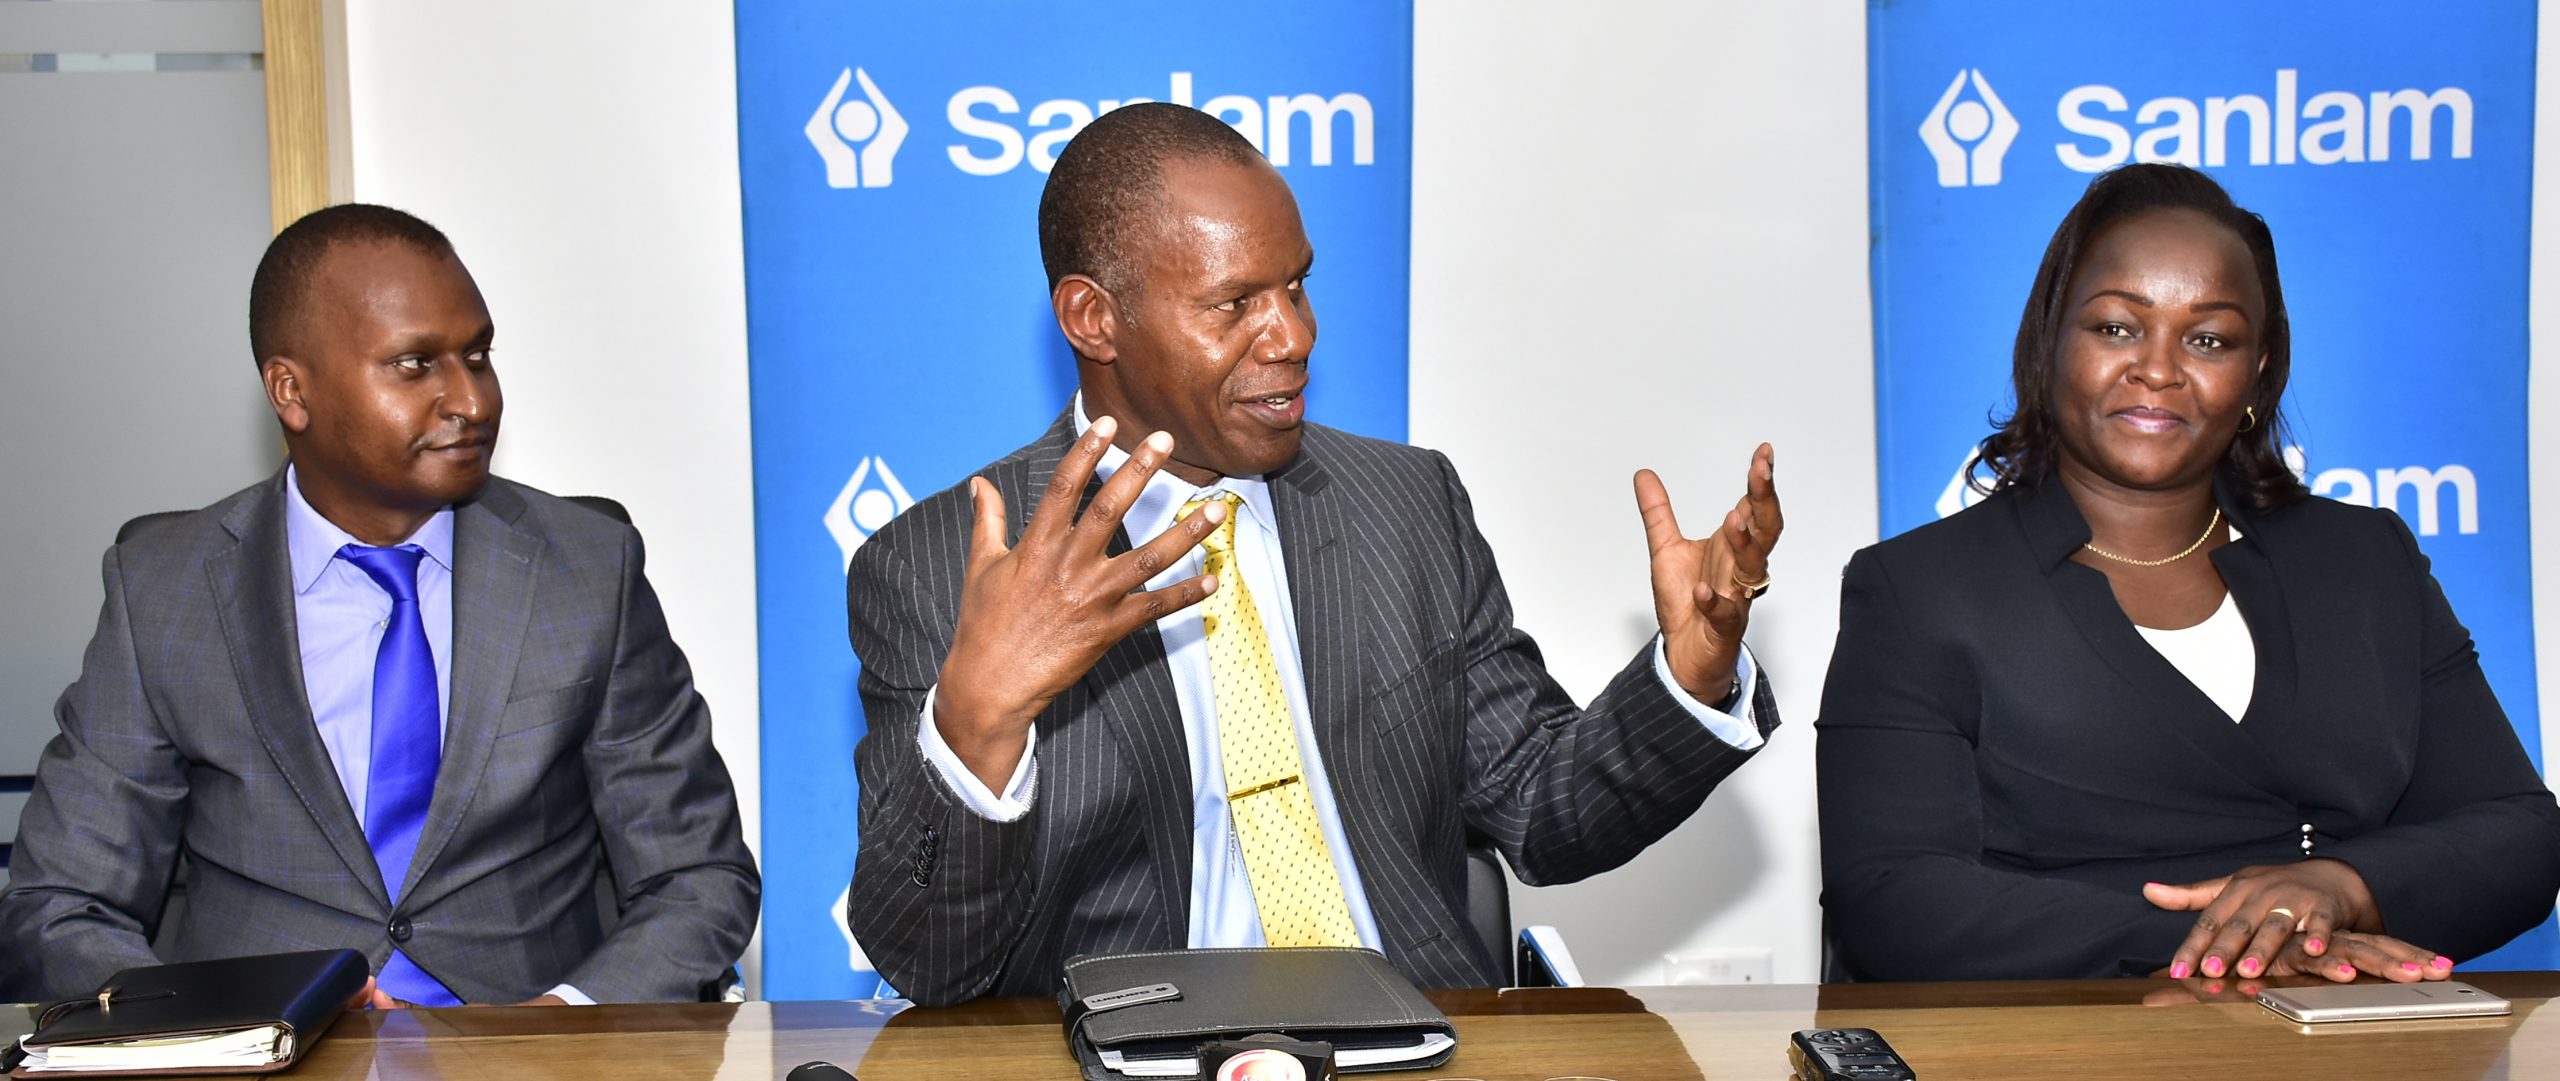 Sanlam Kenya has posted a half year profit despite being in the red during the same period last year. www.businesstoday.co.ke